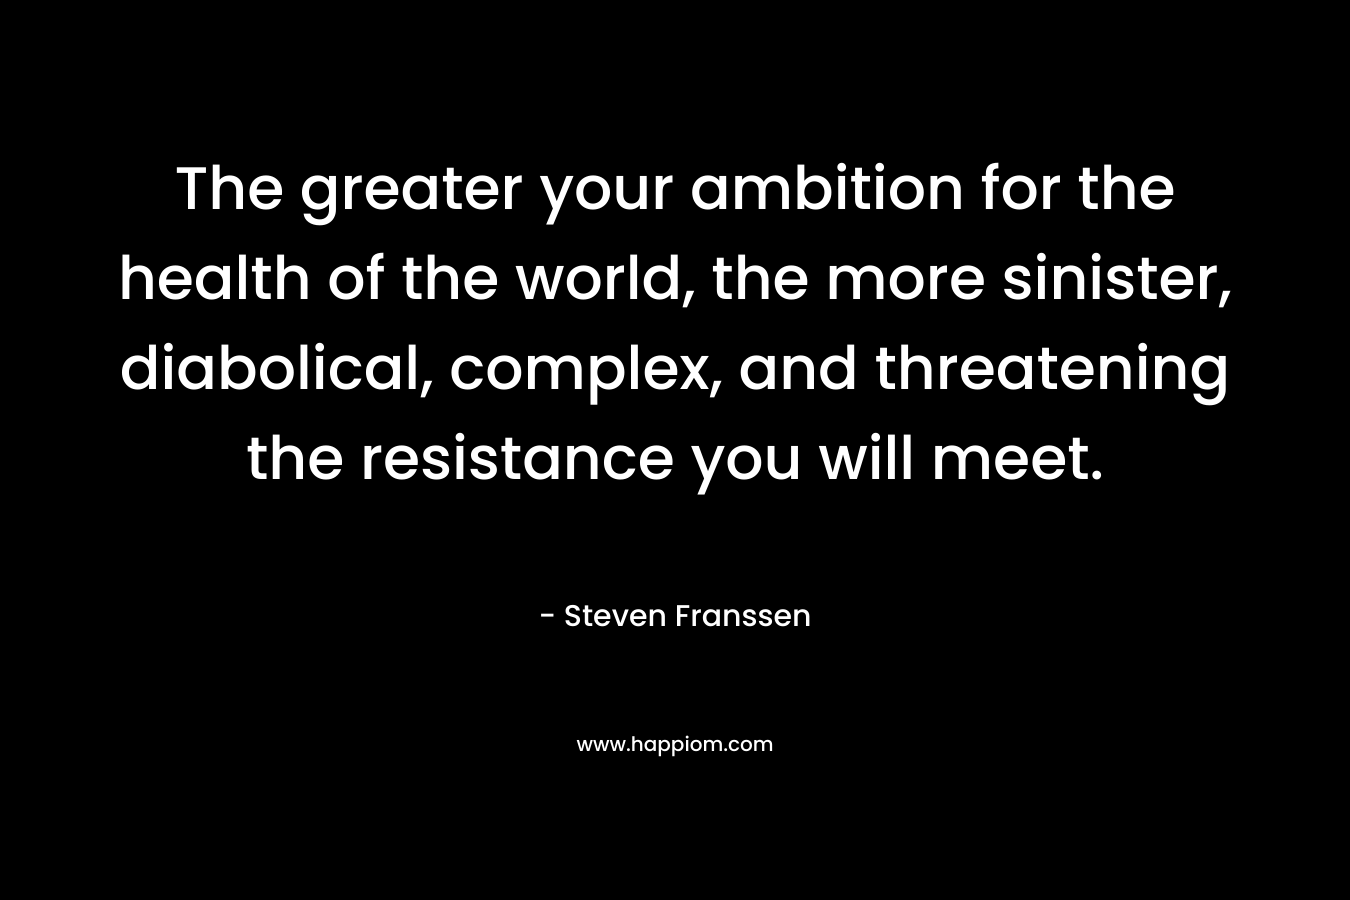 The greater your ambition for the health of the world, the more sinister, diabolical, complex, and threatening the resistance you will meet. – Steven Franssen